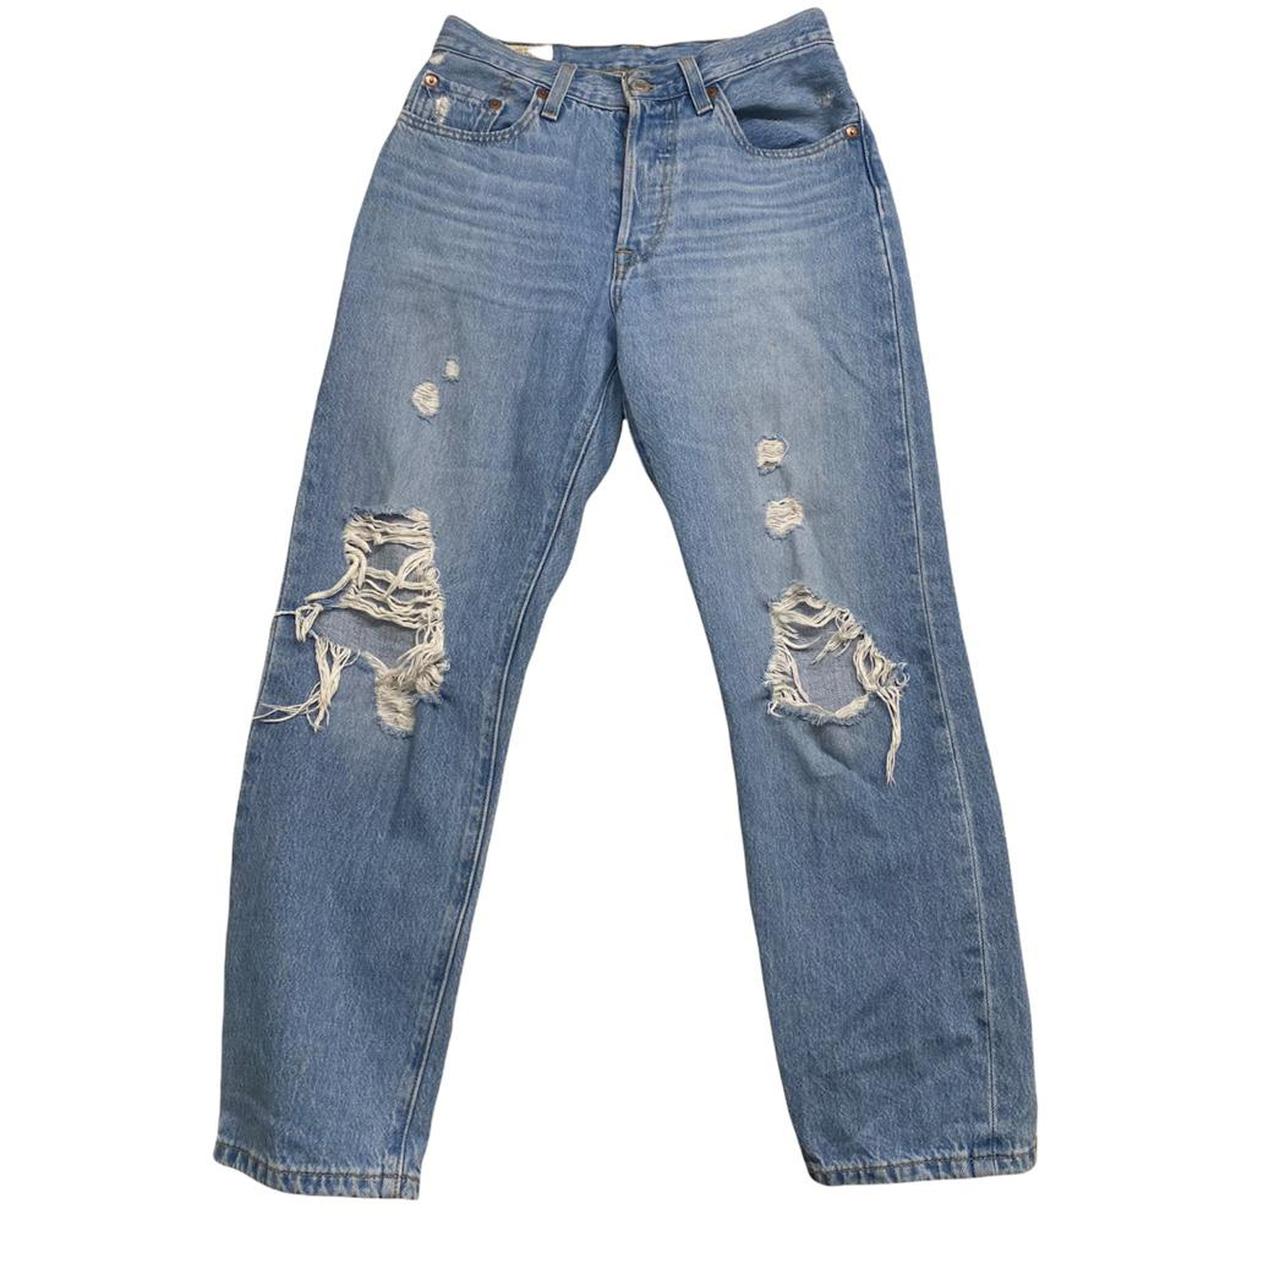 Product Image 2 - Levi’s 501 straight leg ripped